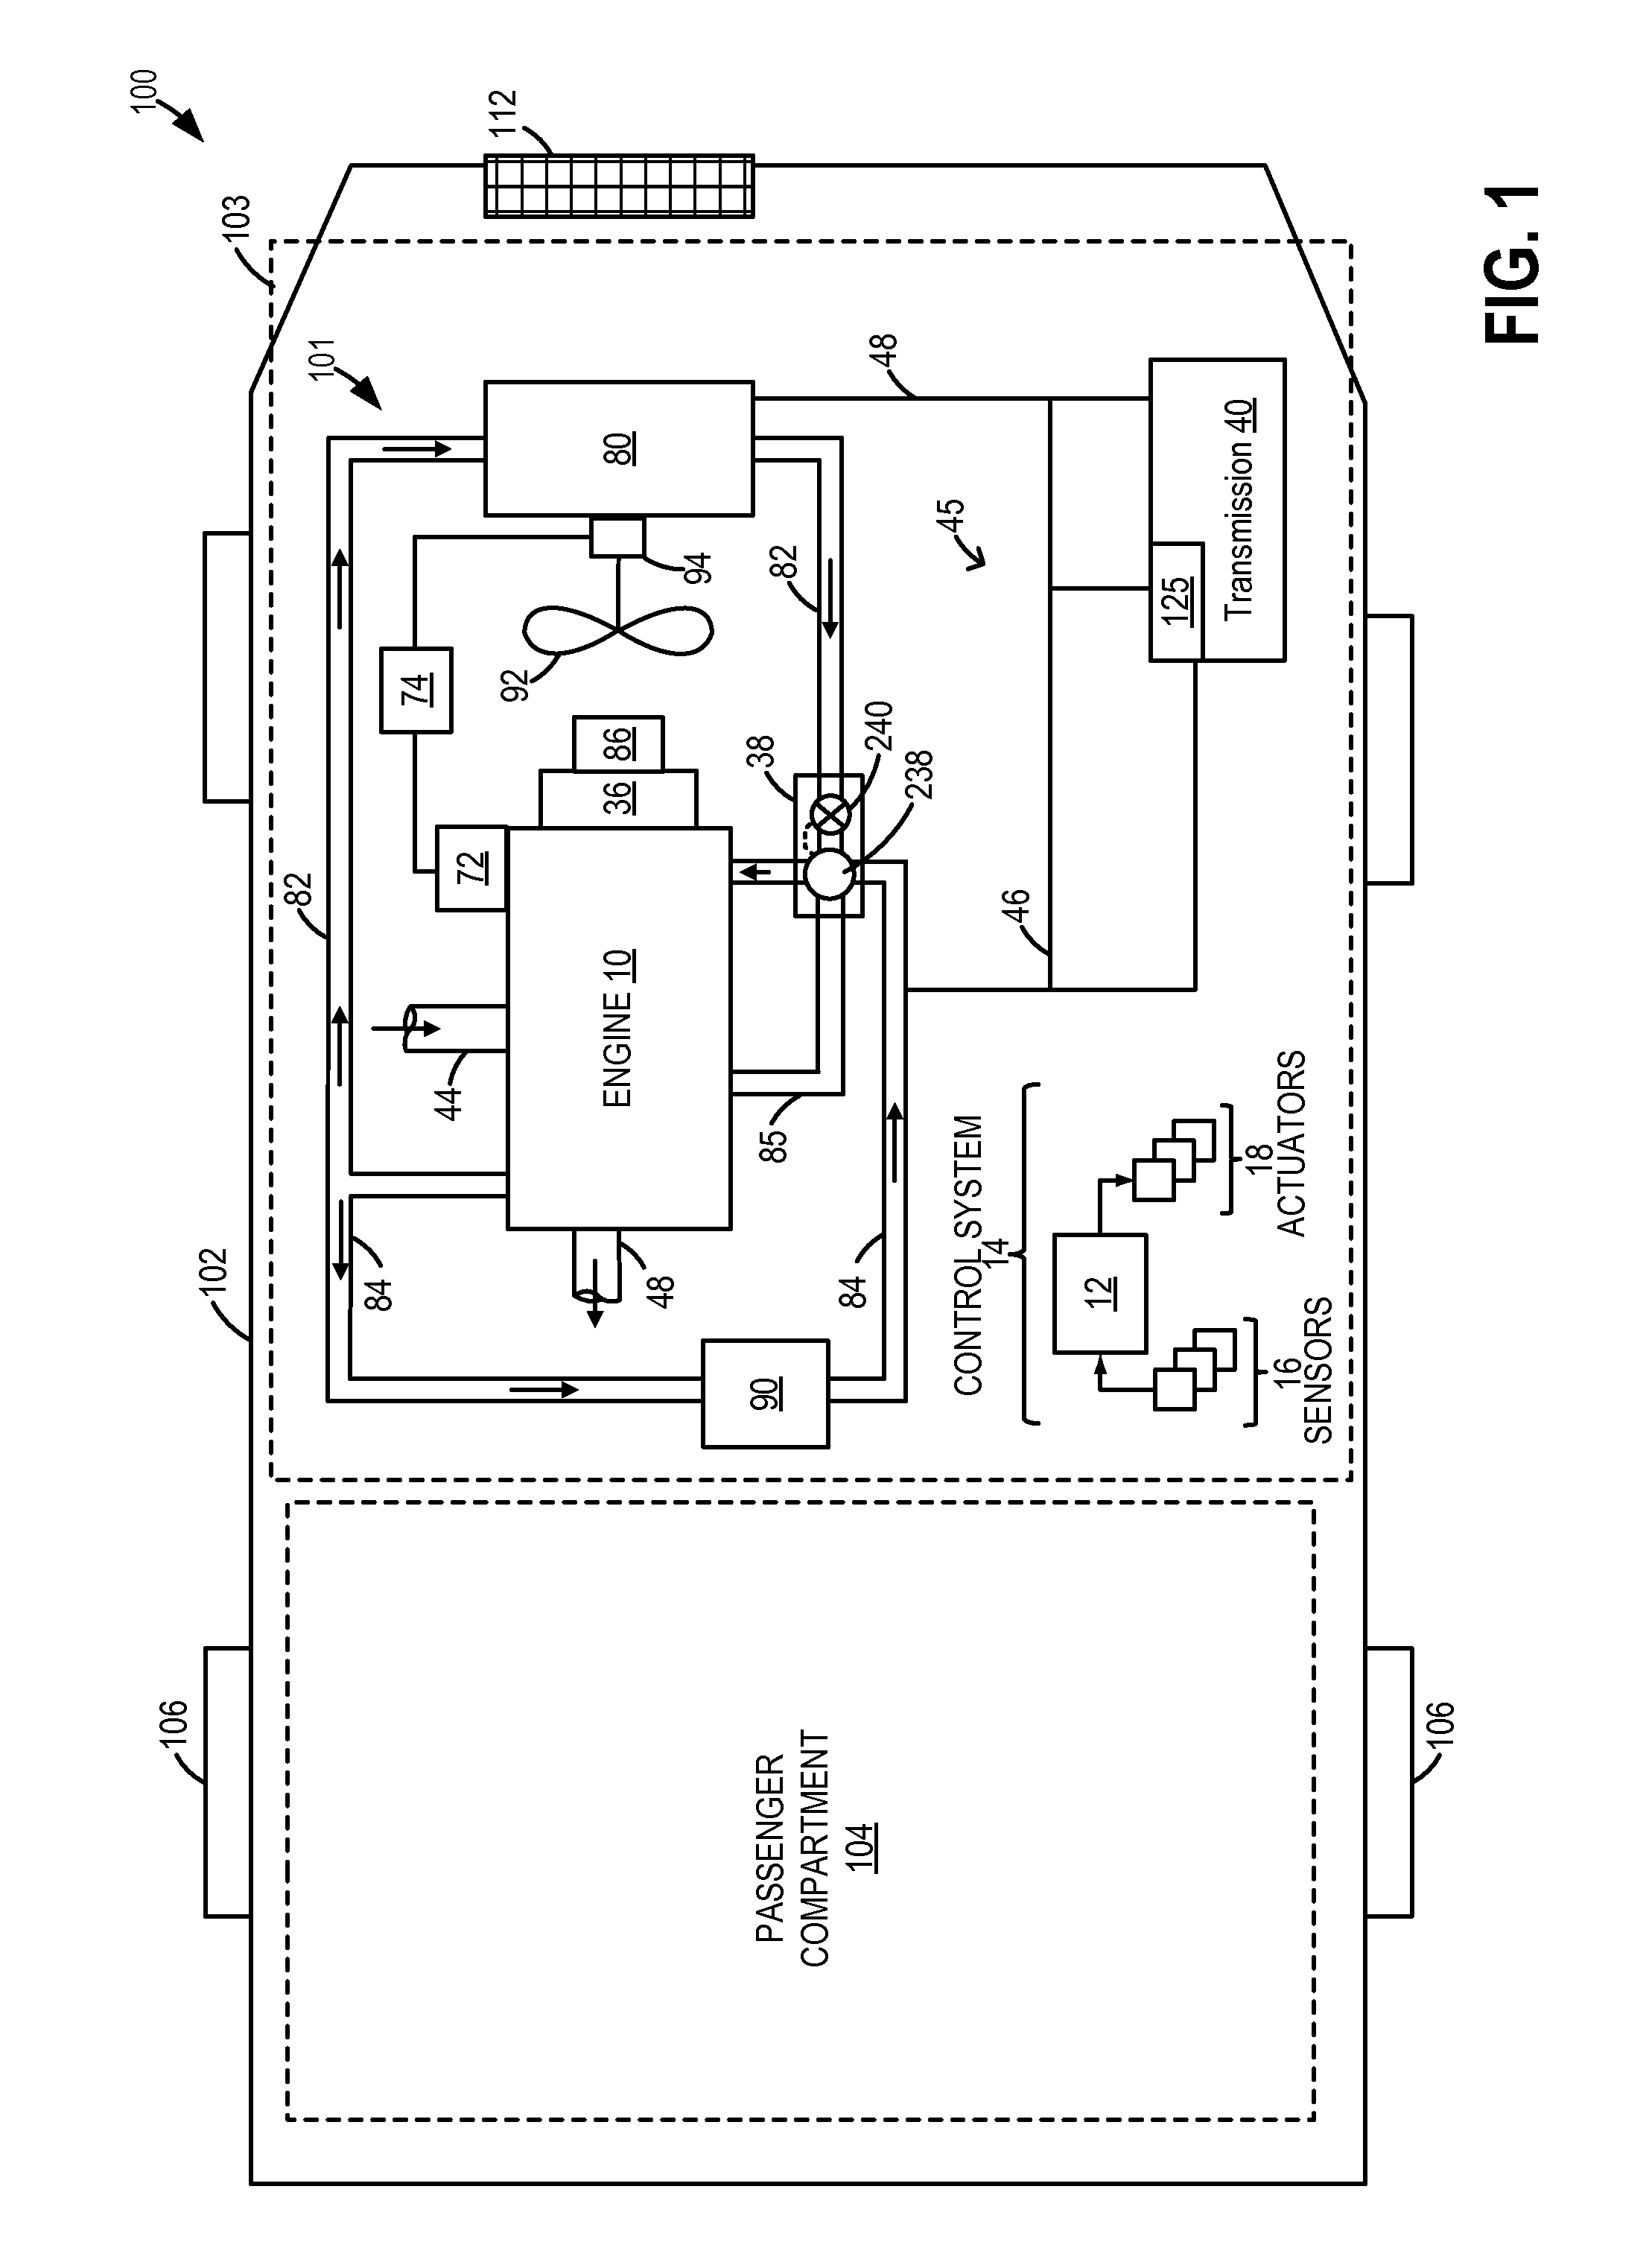 Method and system for engine cooling system control